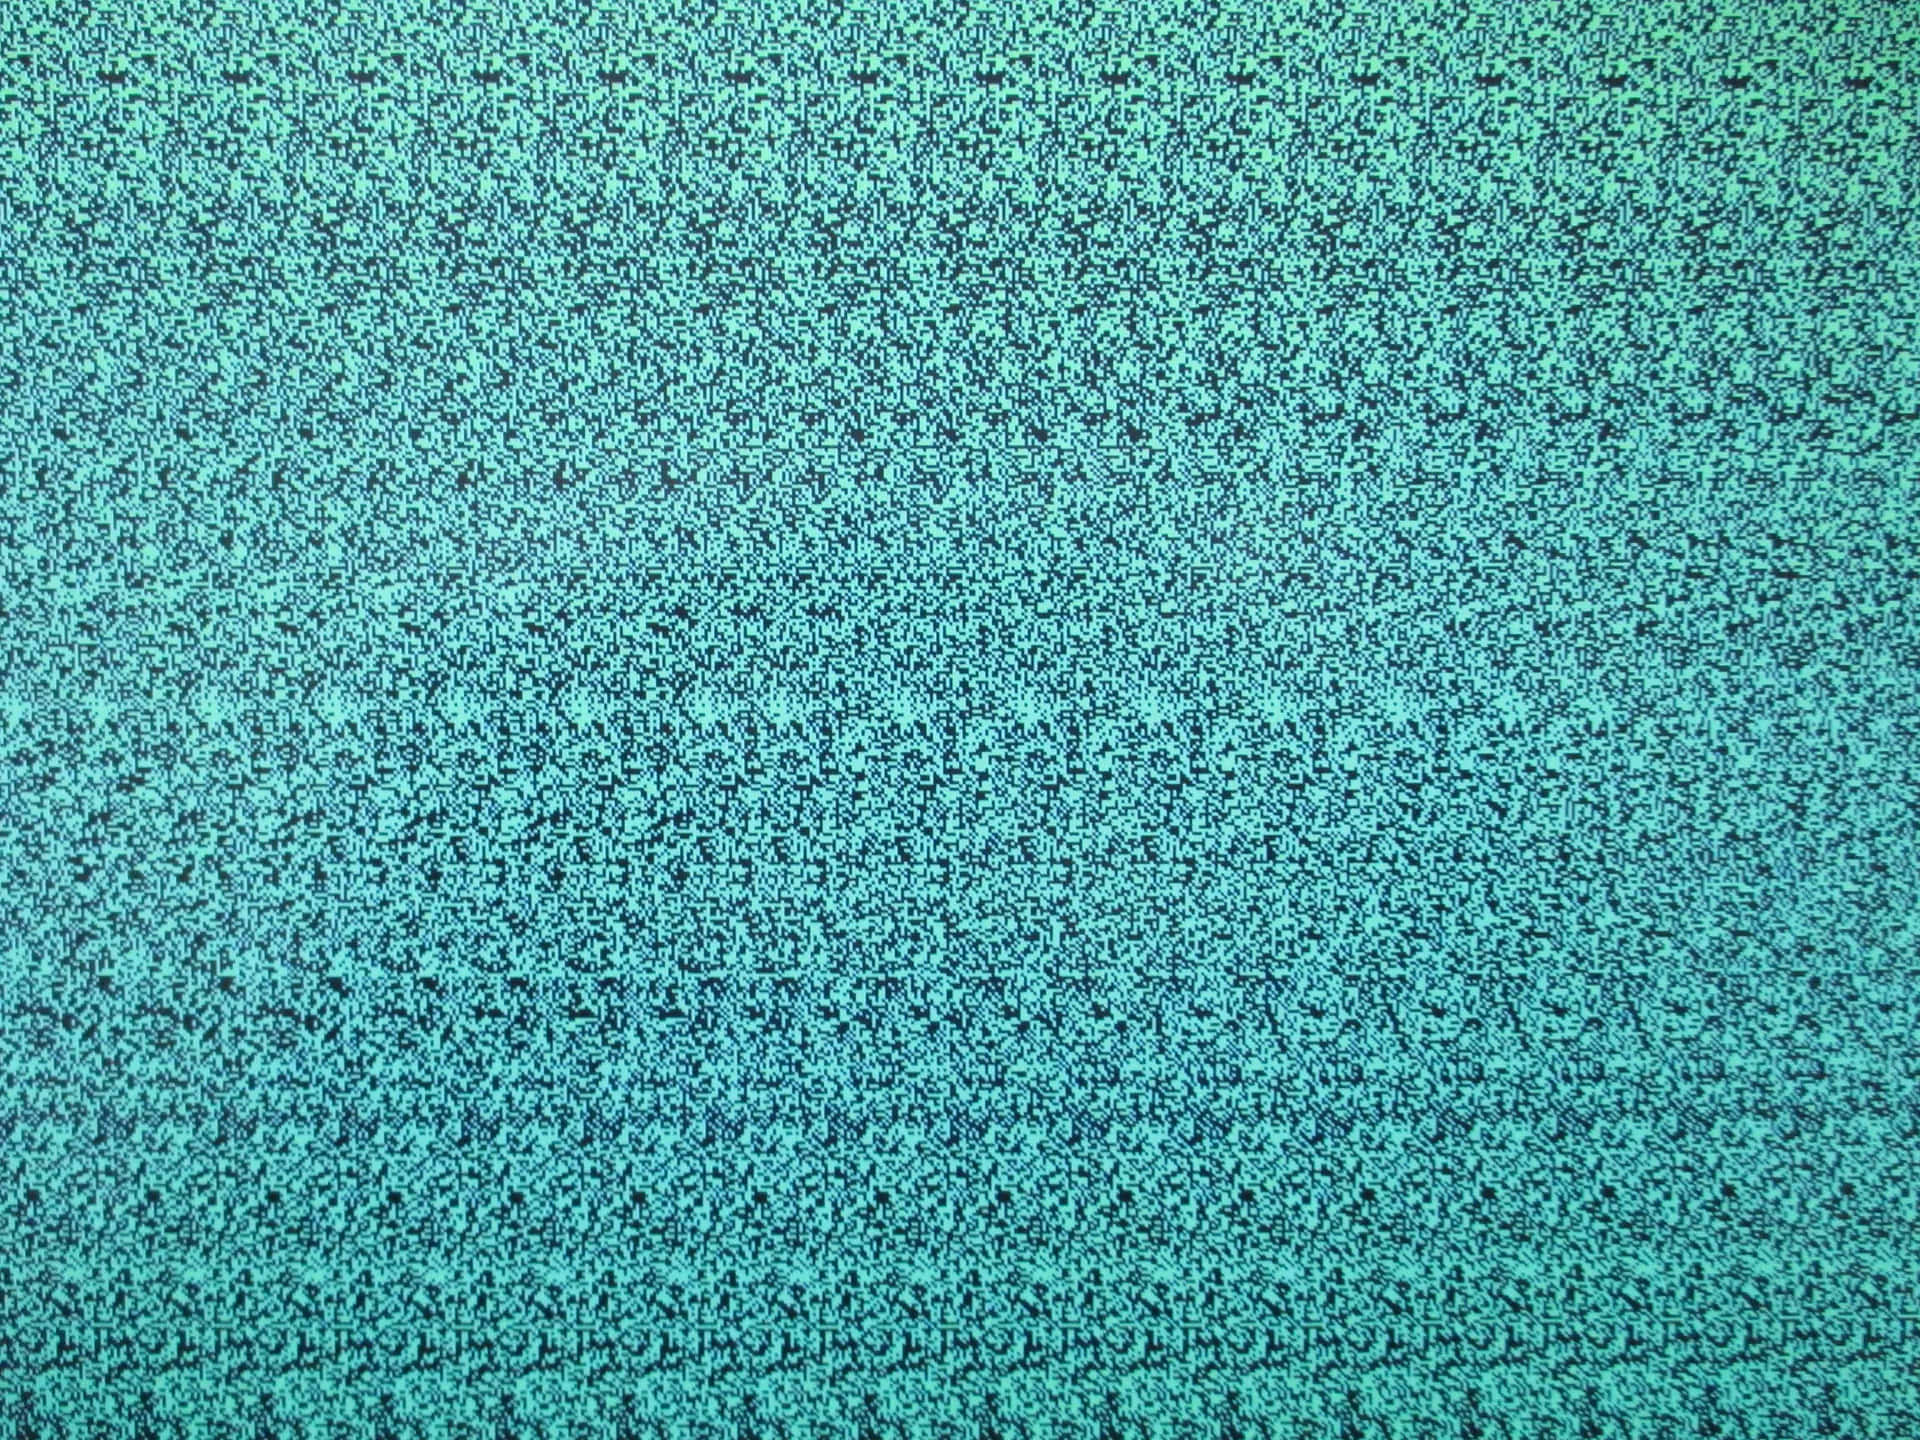 A Close Up Of A Turquoise Fabric